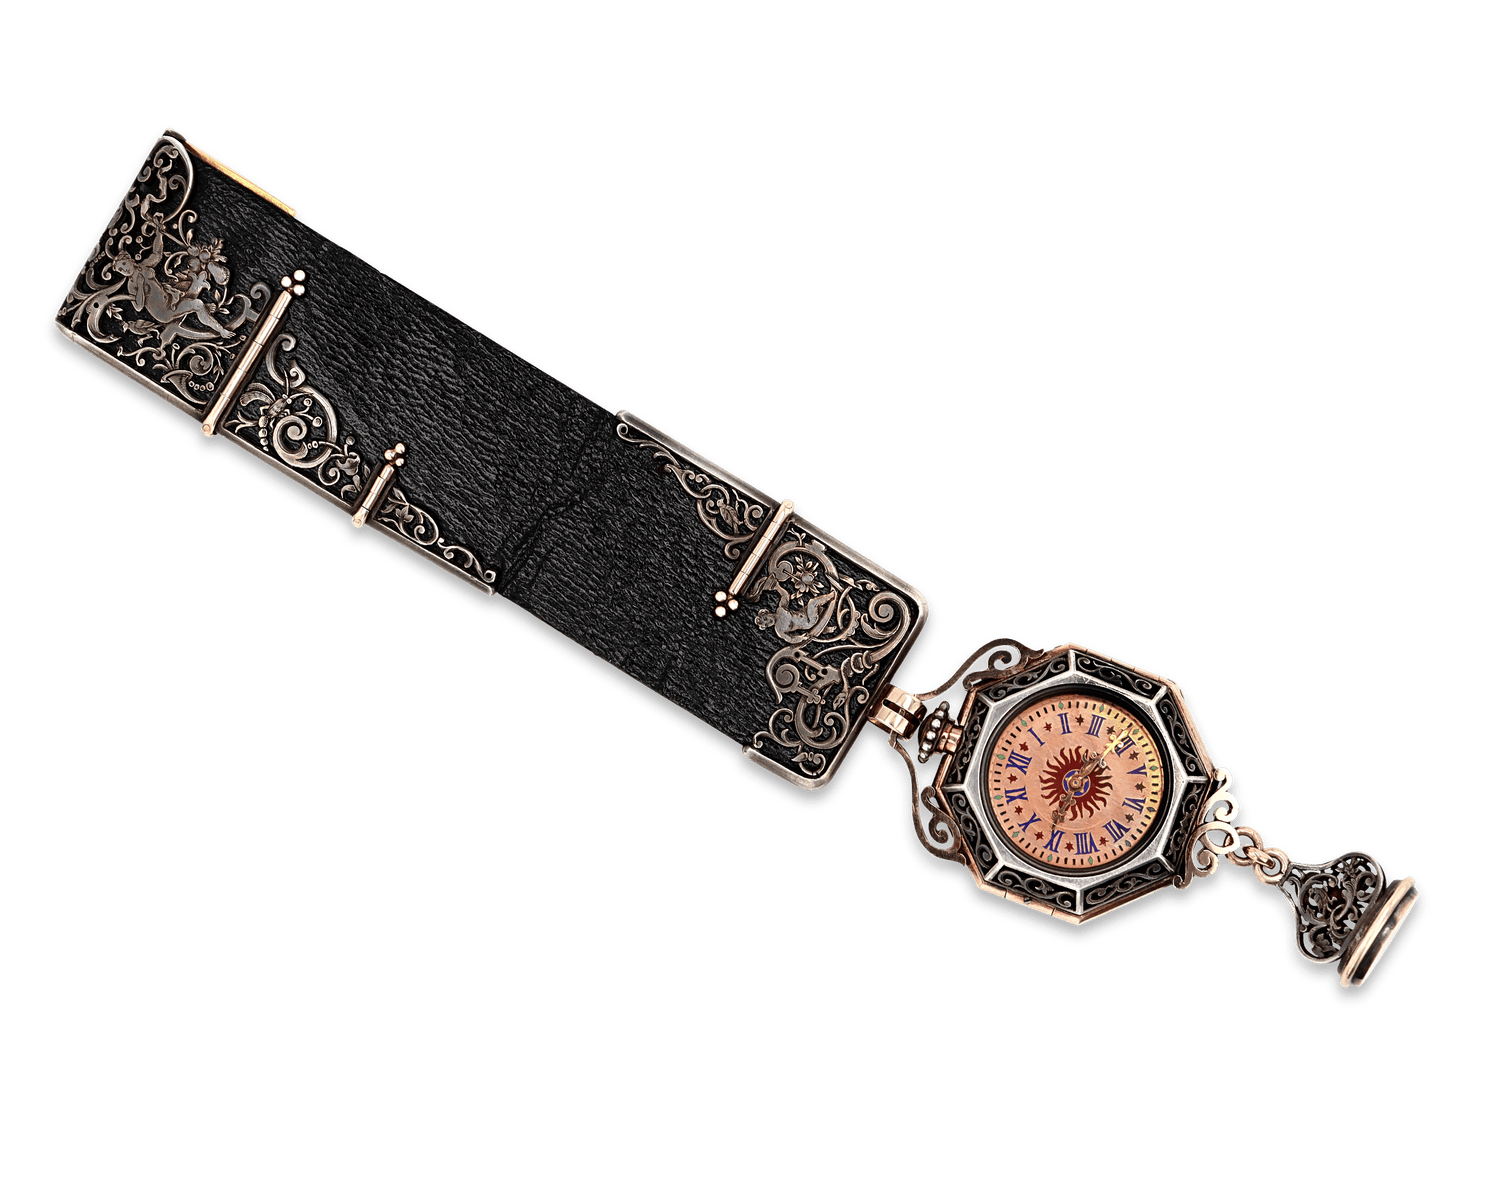 Renaissance Revival Watch and Chatelaine by Boucheron